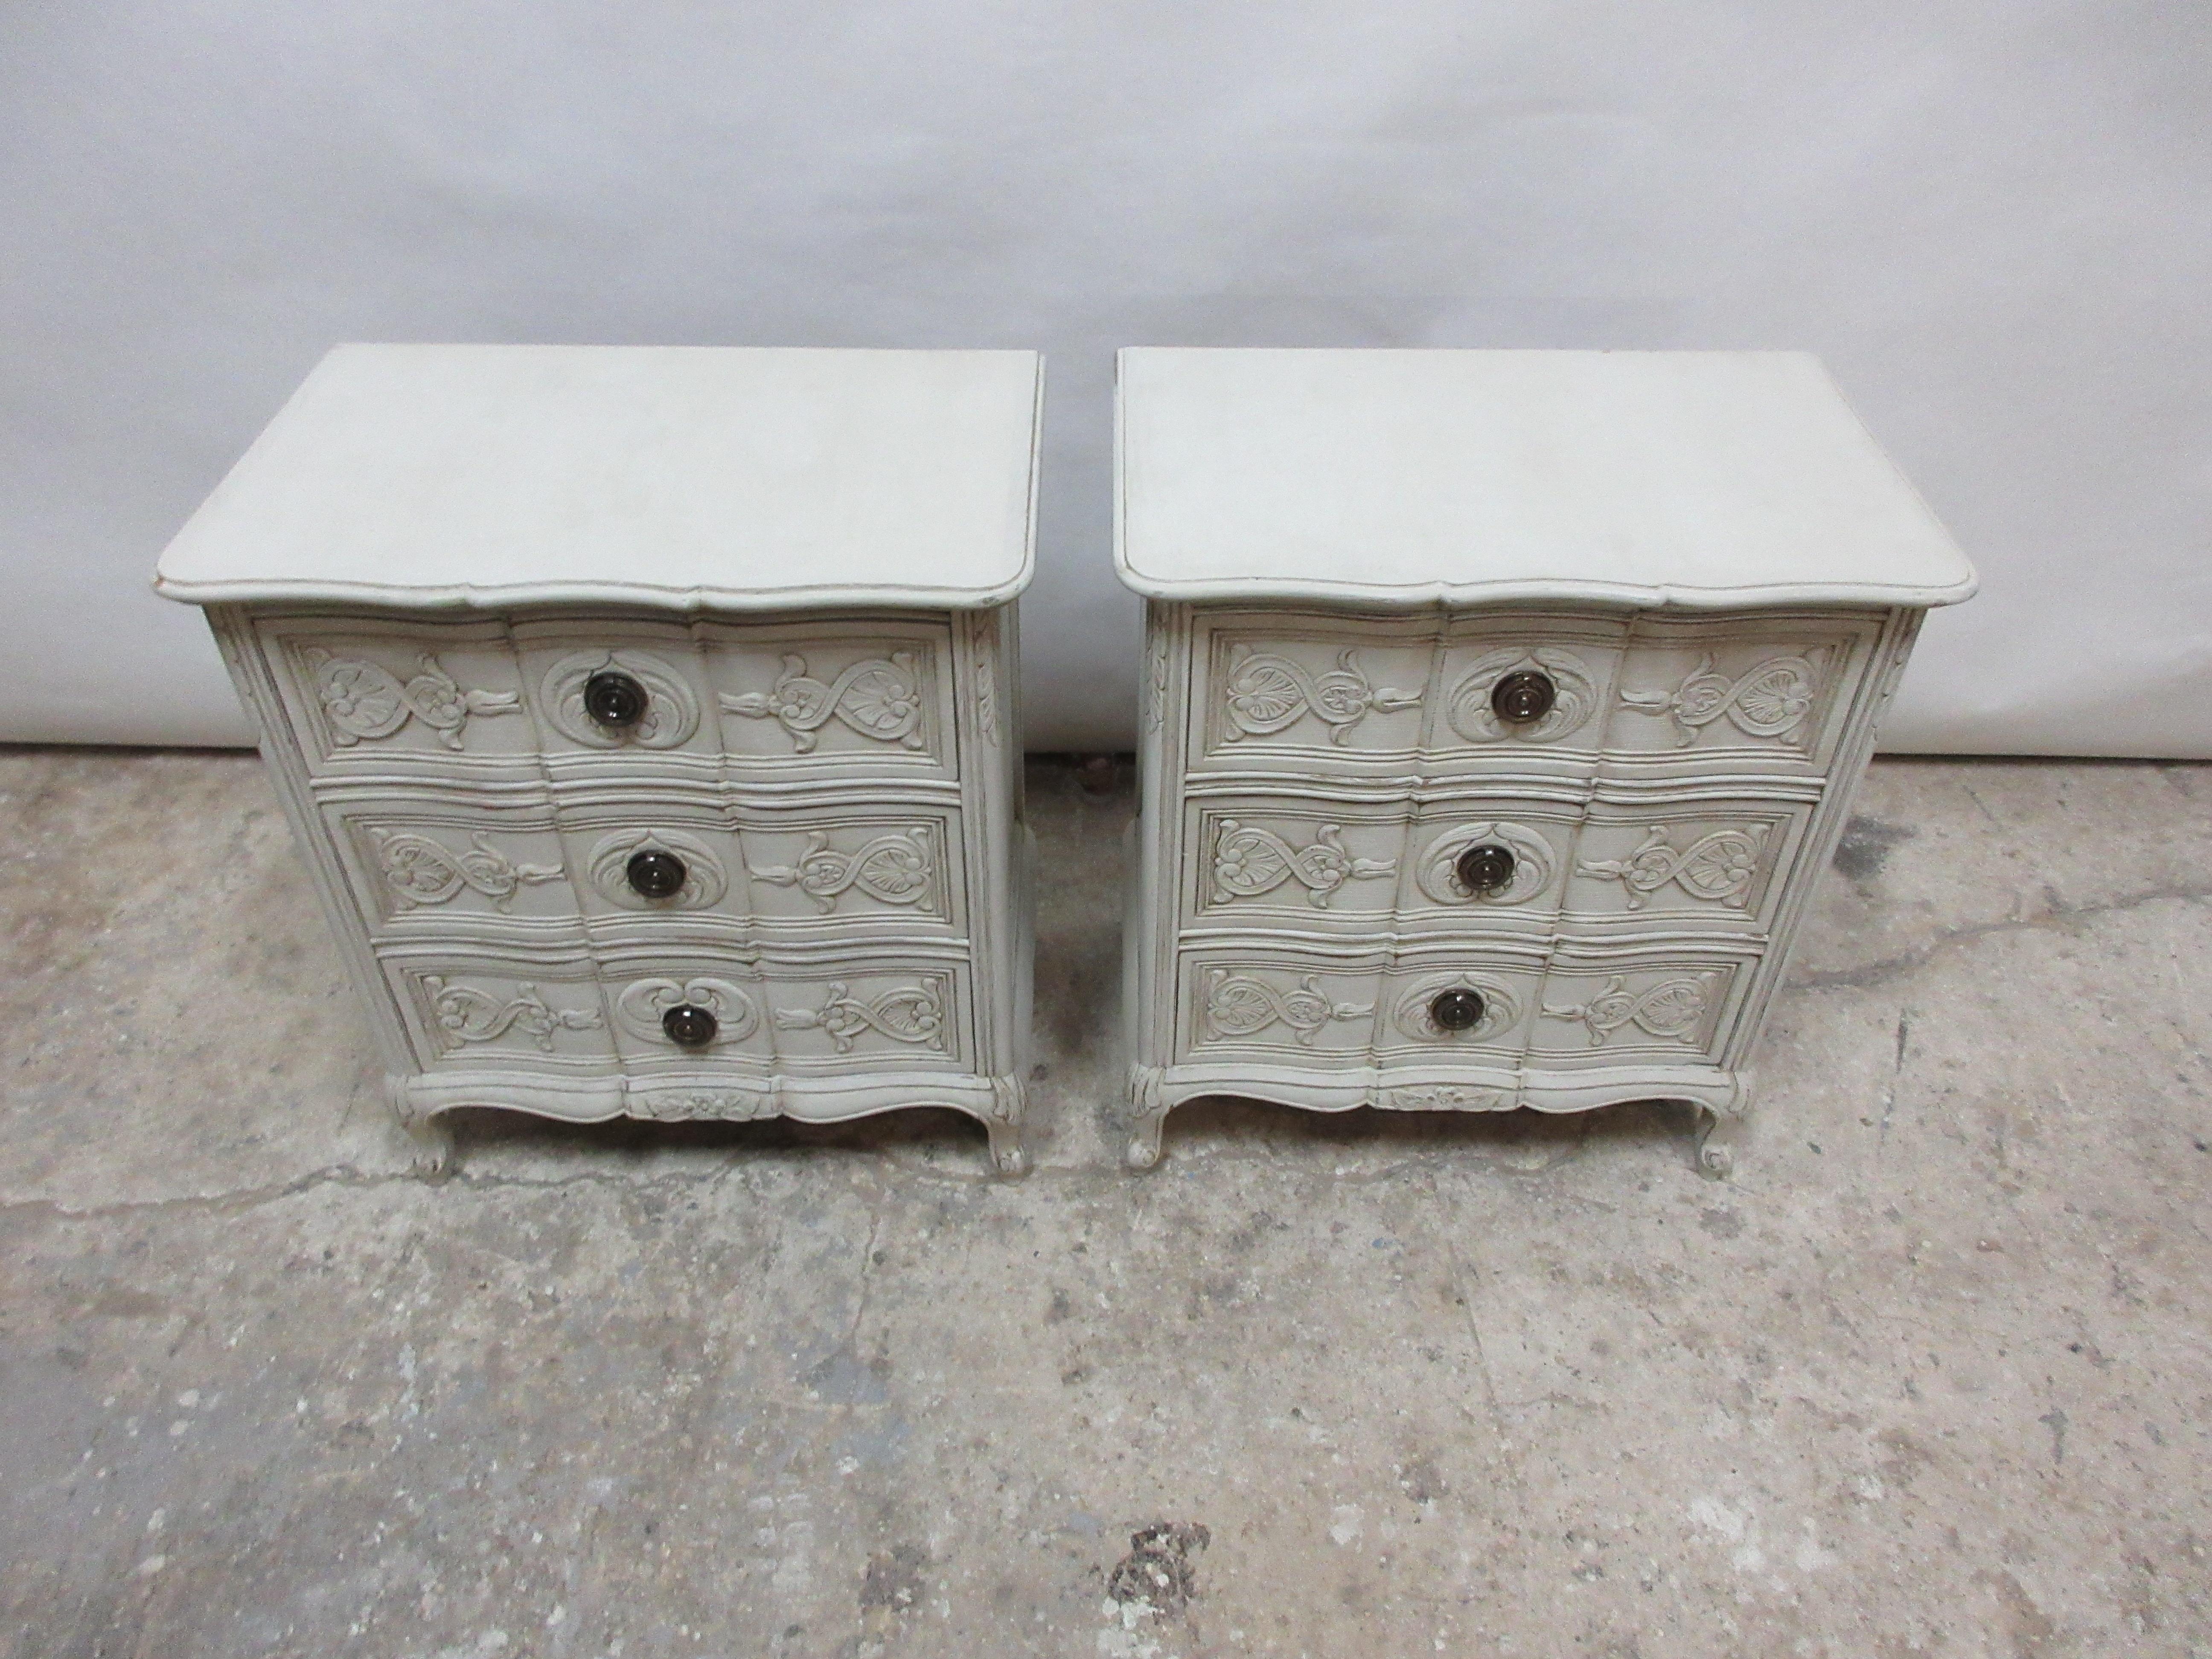 This is a set of 2 carved swedish Rococo style nightstands. They have been restored and repainted with milk paints 